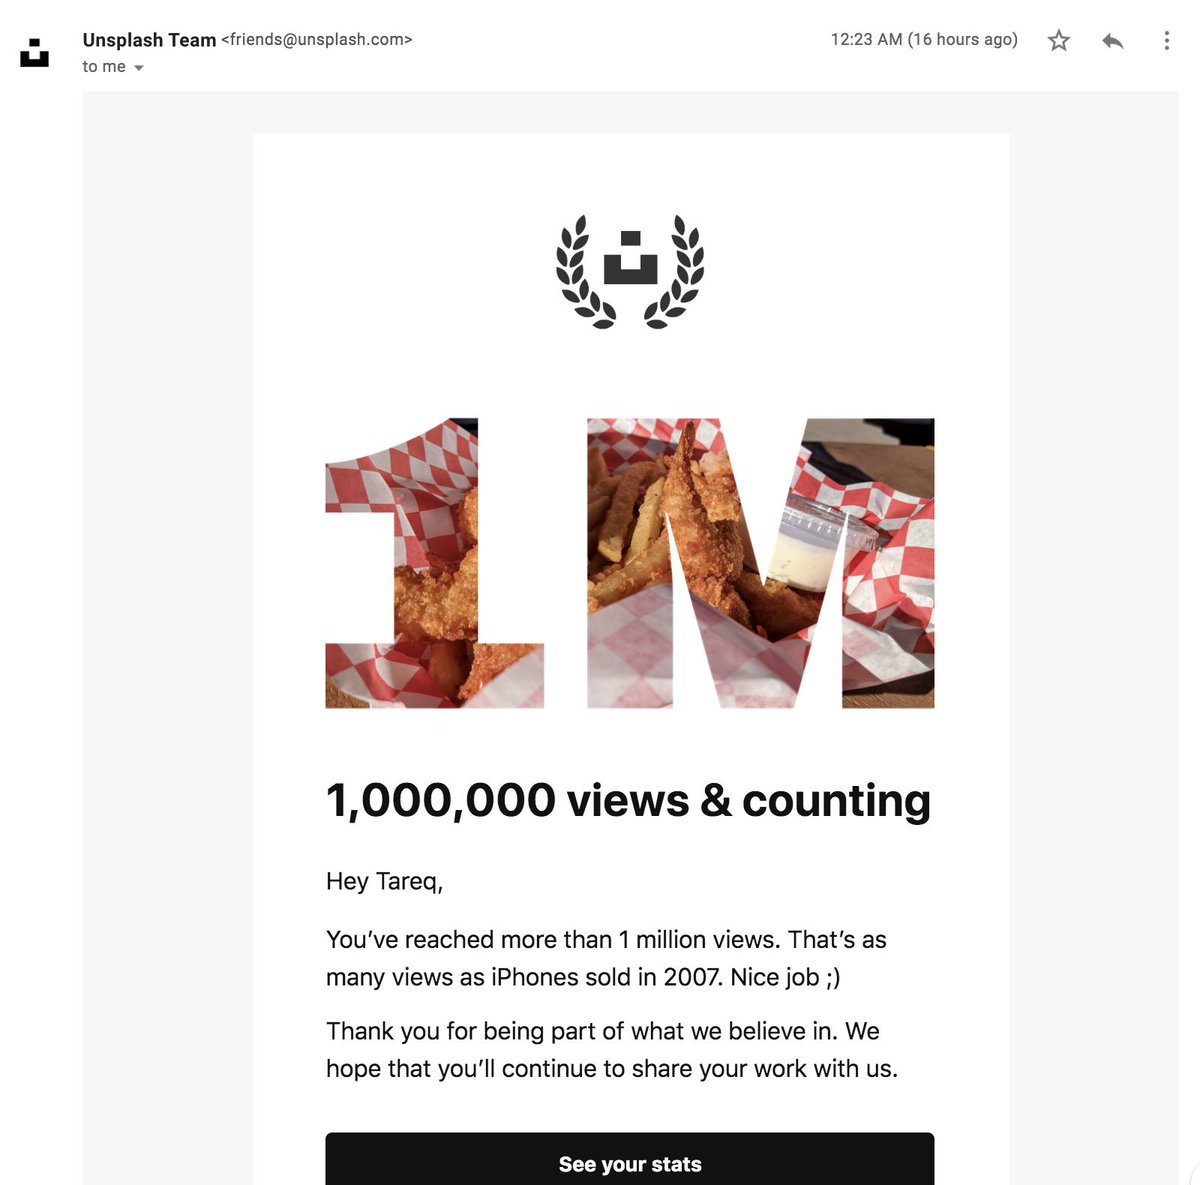  #delightful_design_details 26 @unsplash personalizes engagement emails with real statistics of the photos you've uploaded. They even go a step further with a custom "1M" graphic made with your own photo.Delightful because it feels written just for you making you feel special.